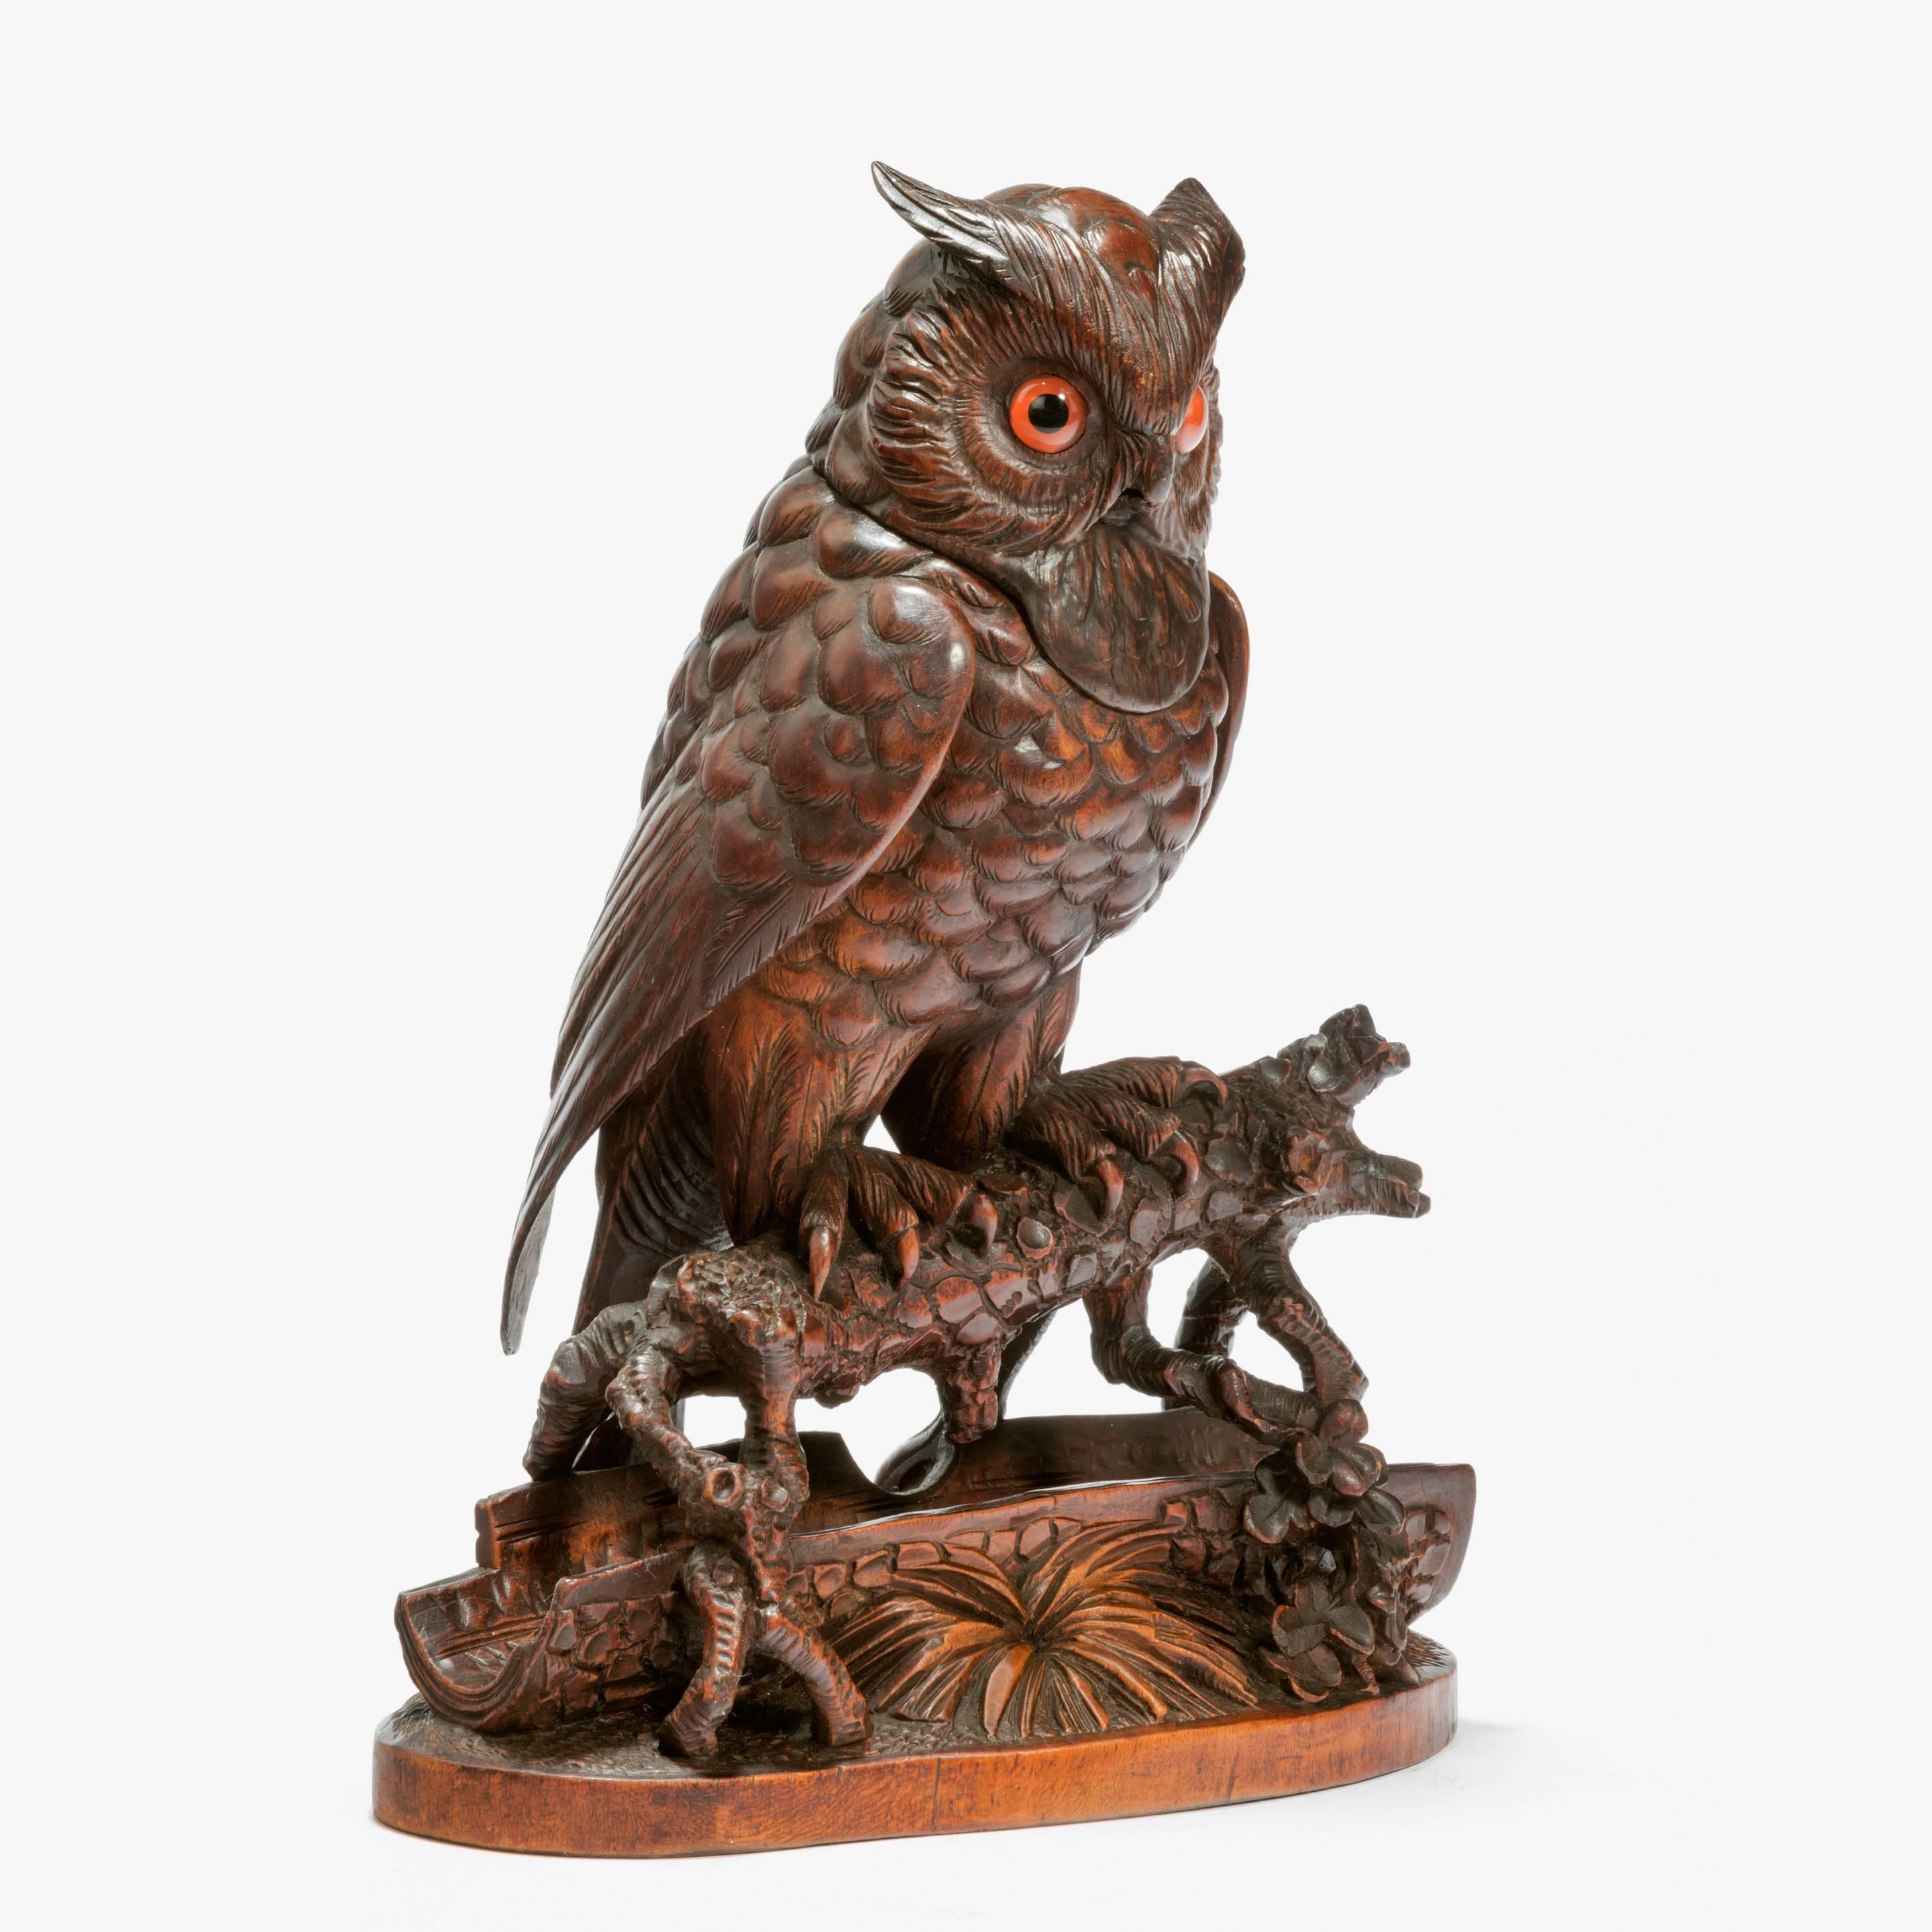 In the form of an owl with a hinged head and glass eyes.